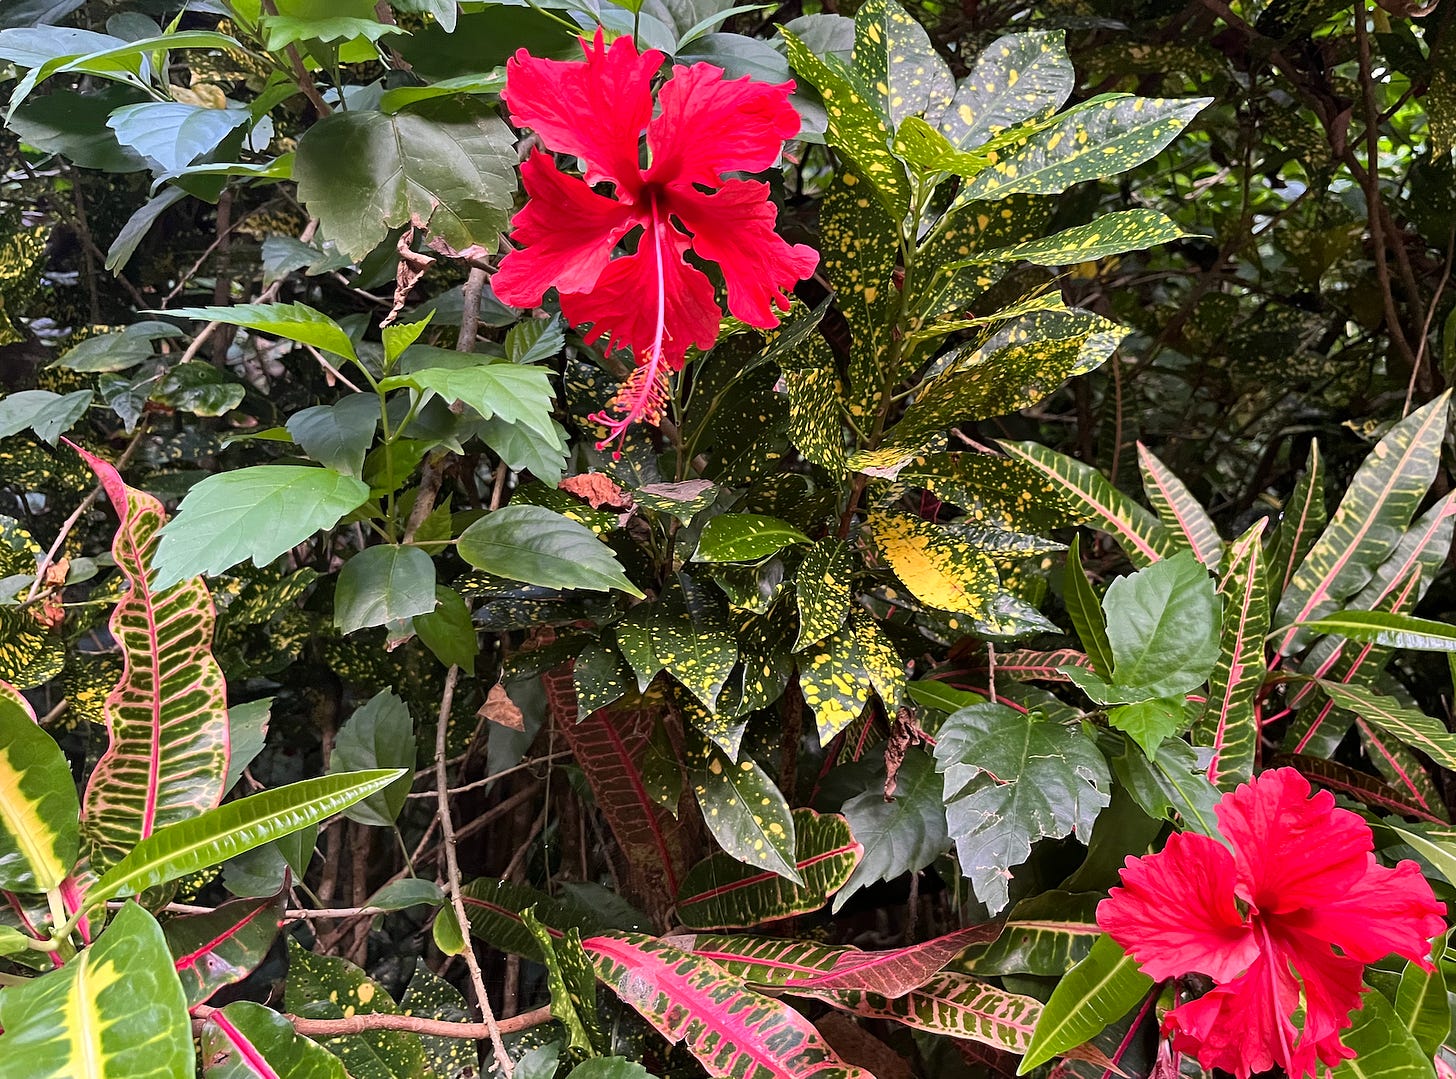 Hibiscus flowers and colorful foliage.